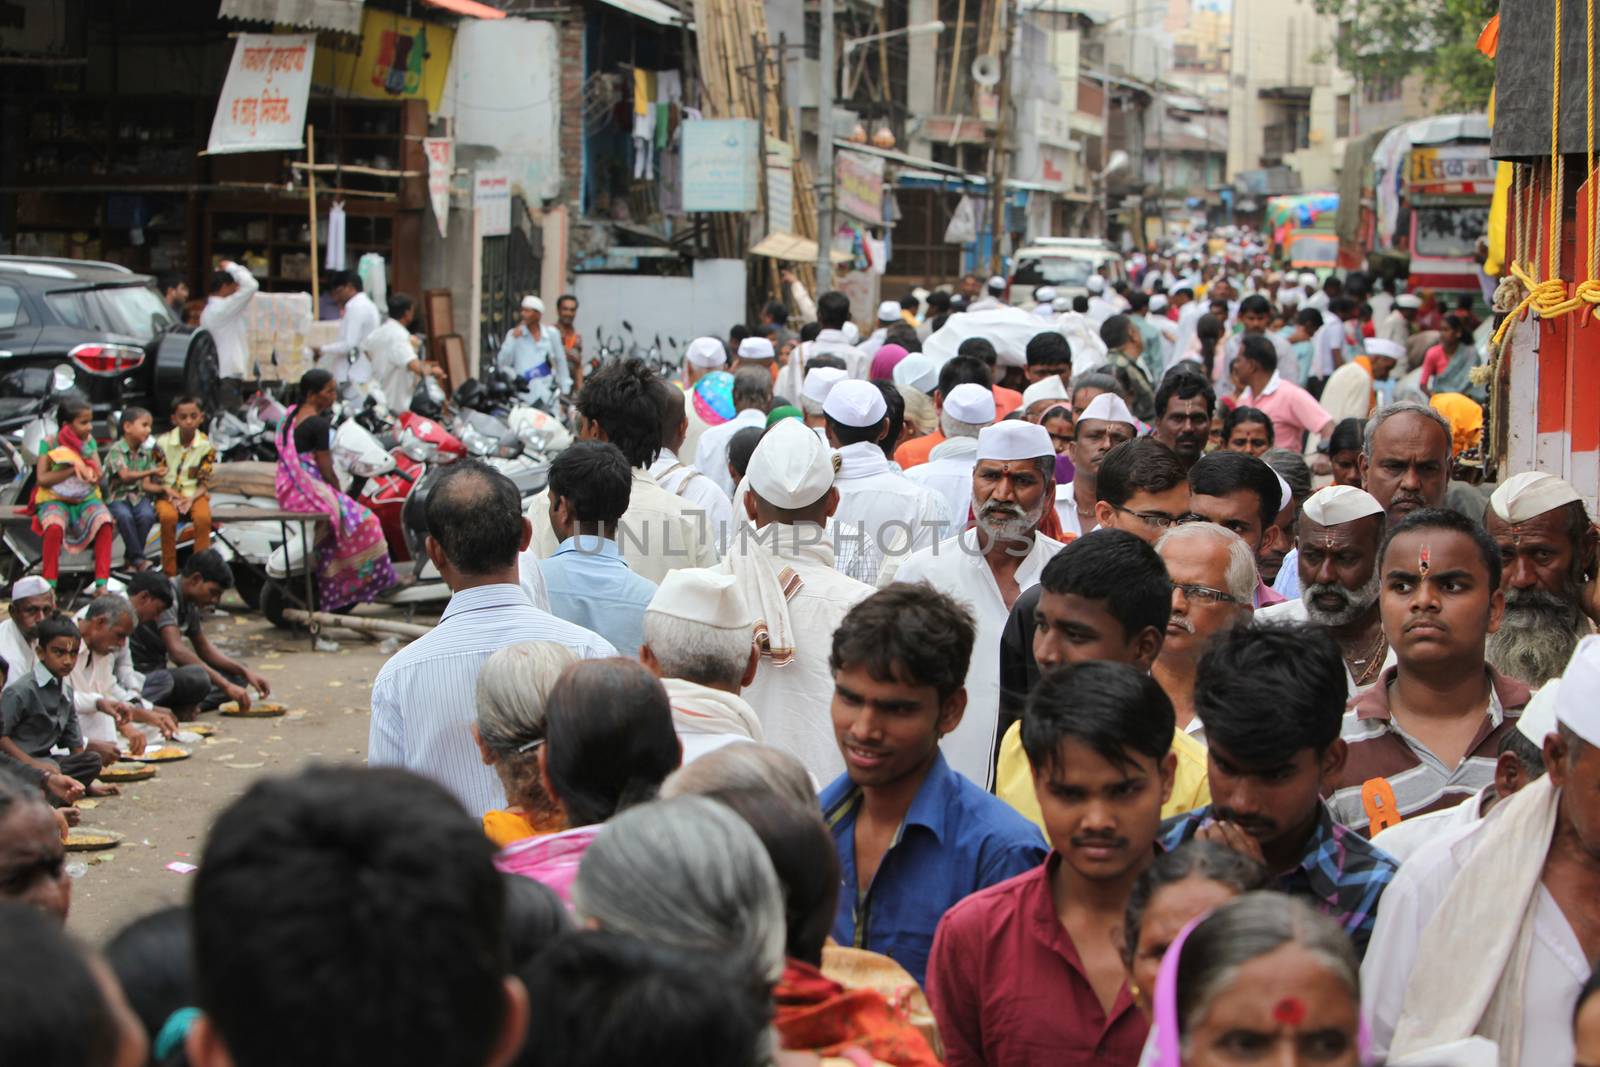 Pune, India  - ‎July 11, ‎2015: Thousands of people throng t by thefinalmiracle